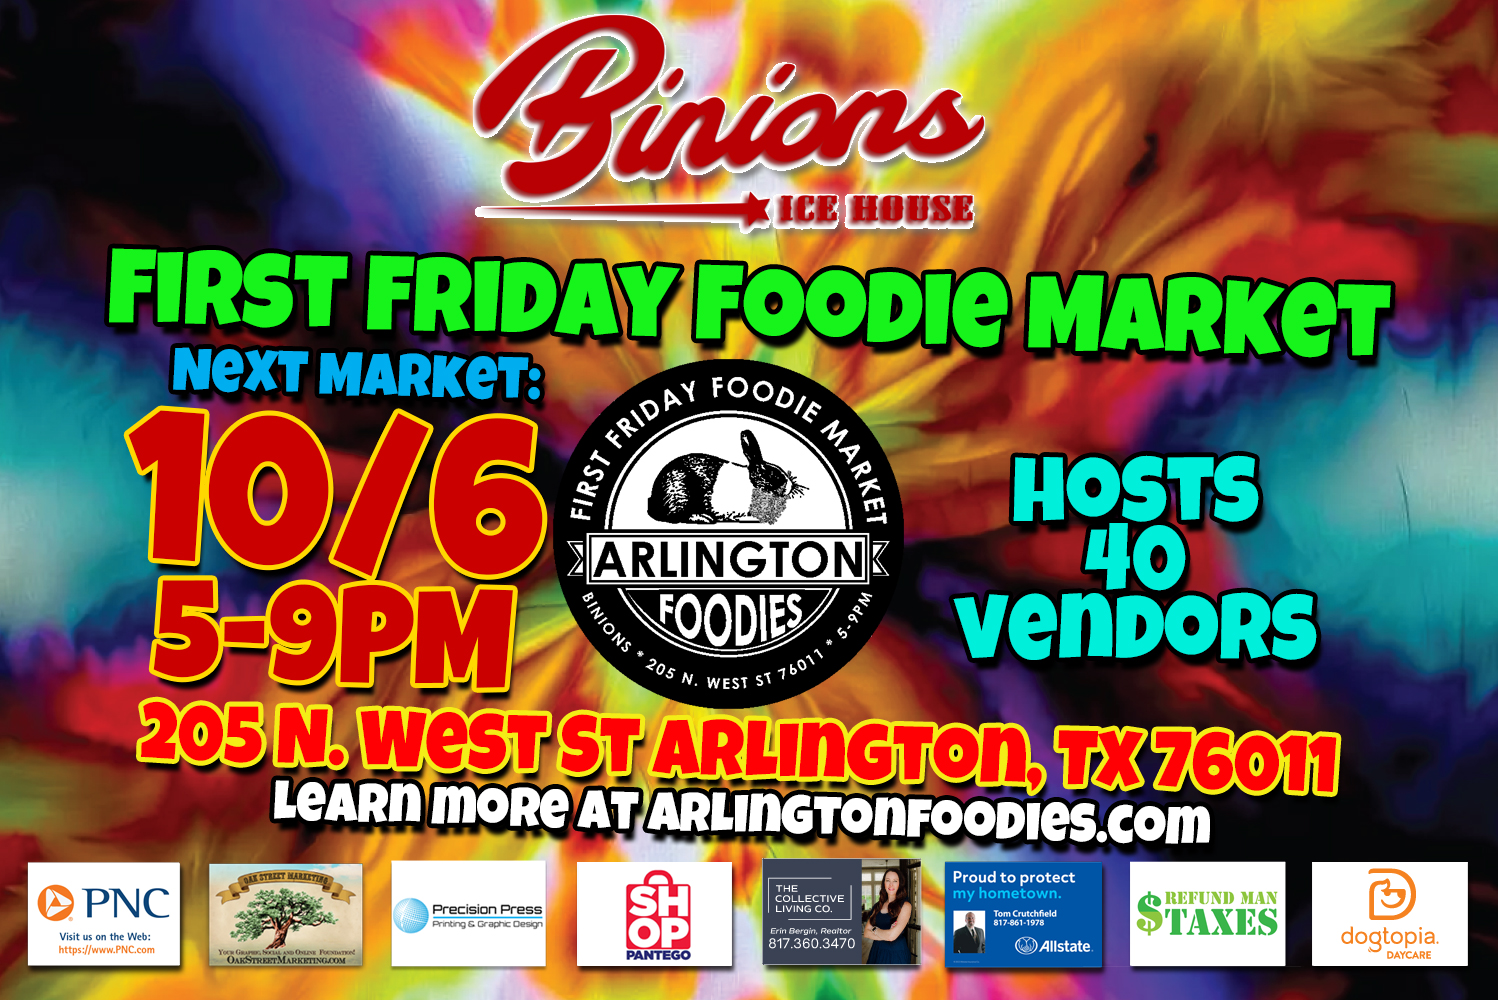 First Friday Foodie Market